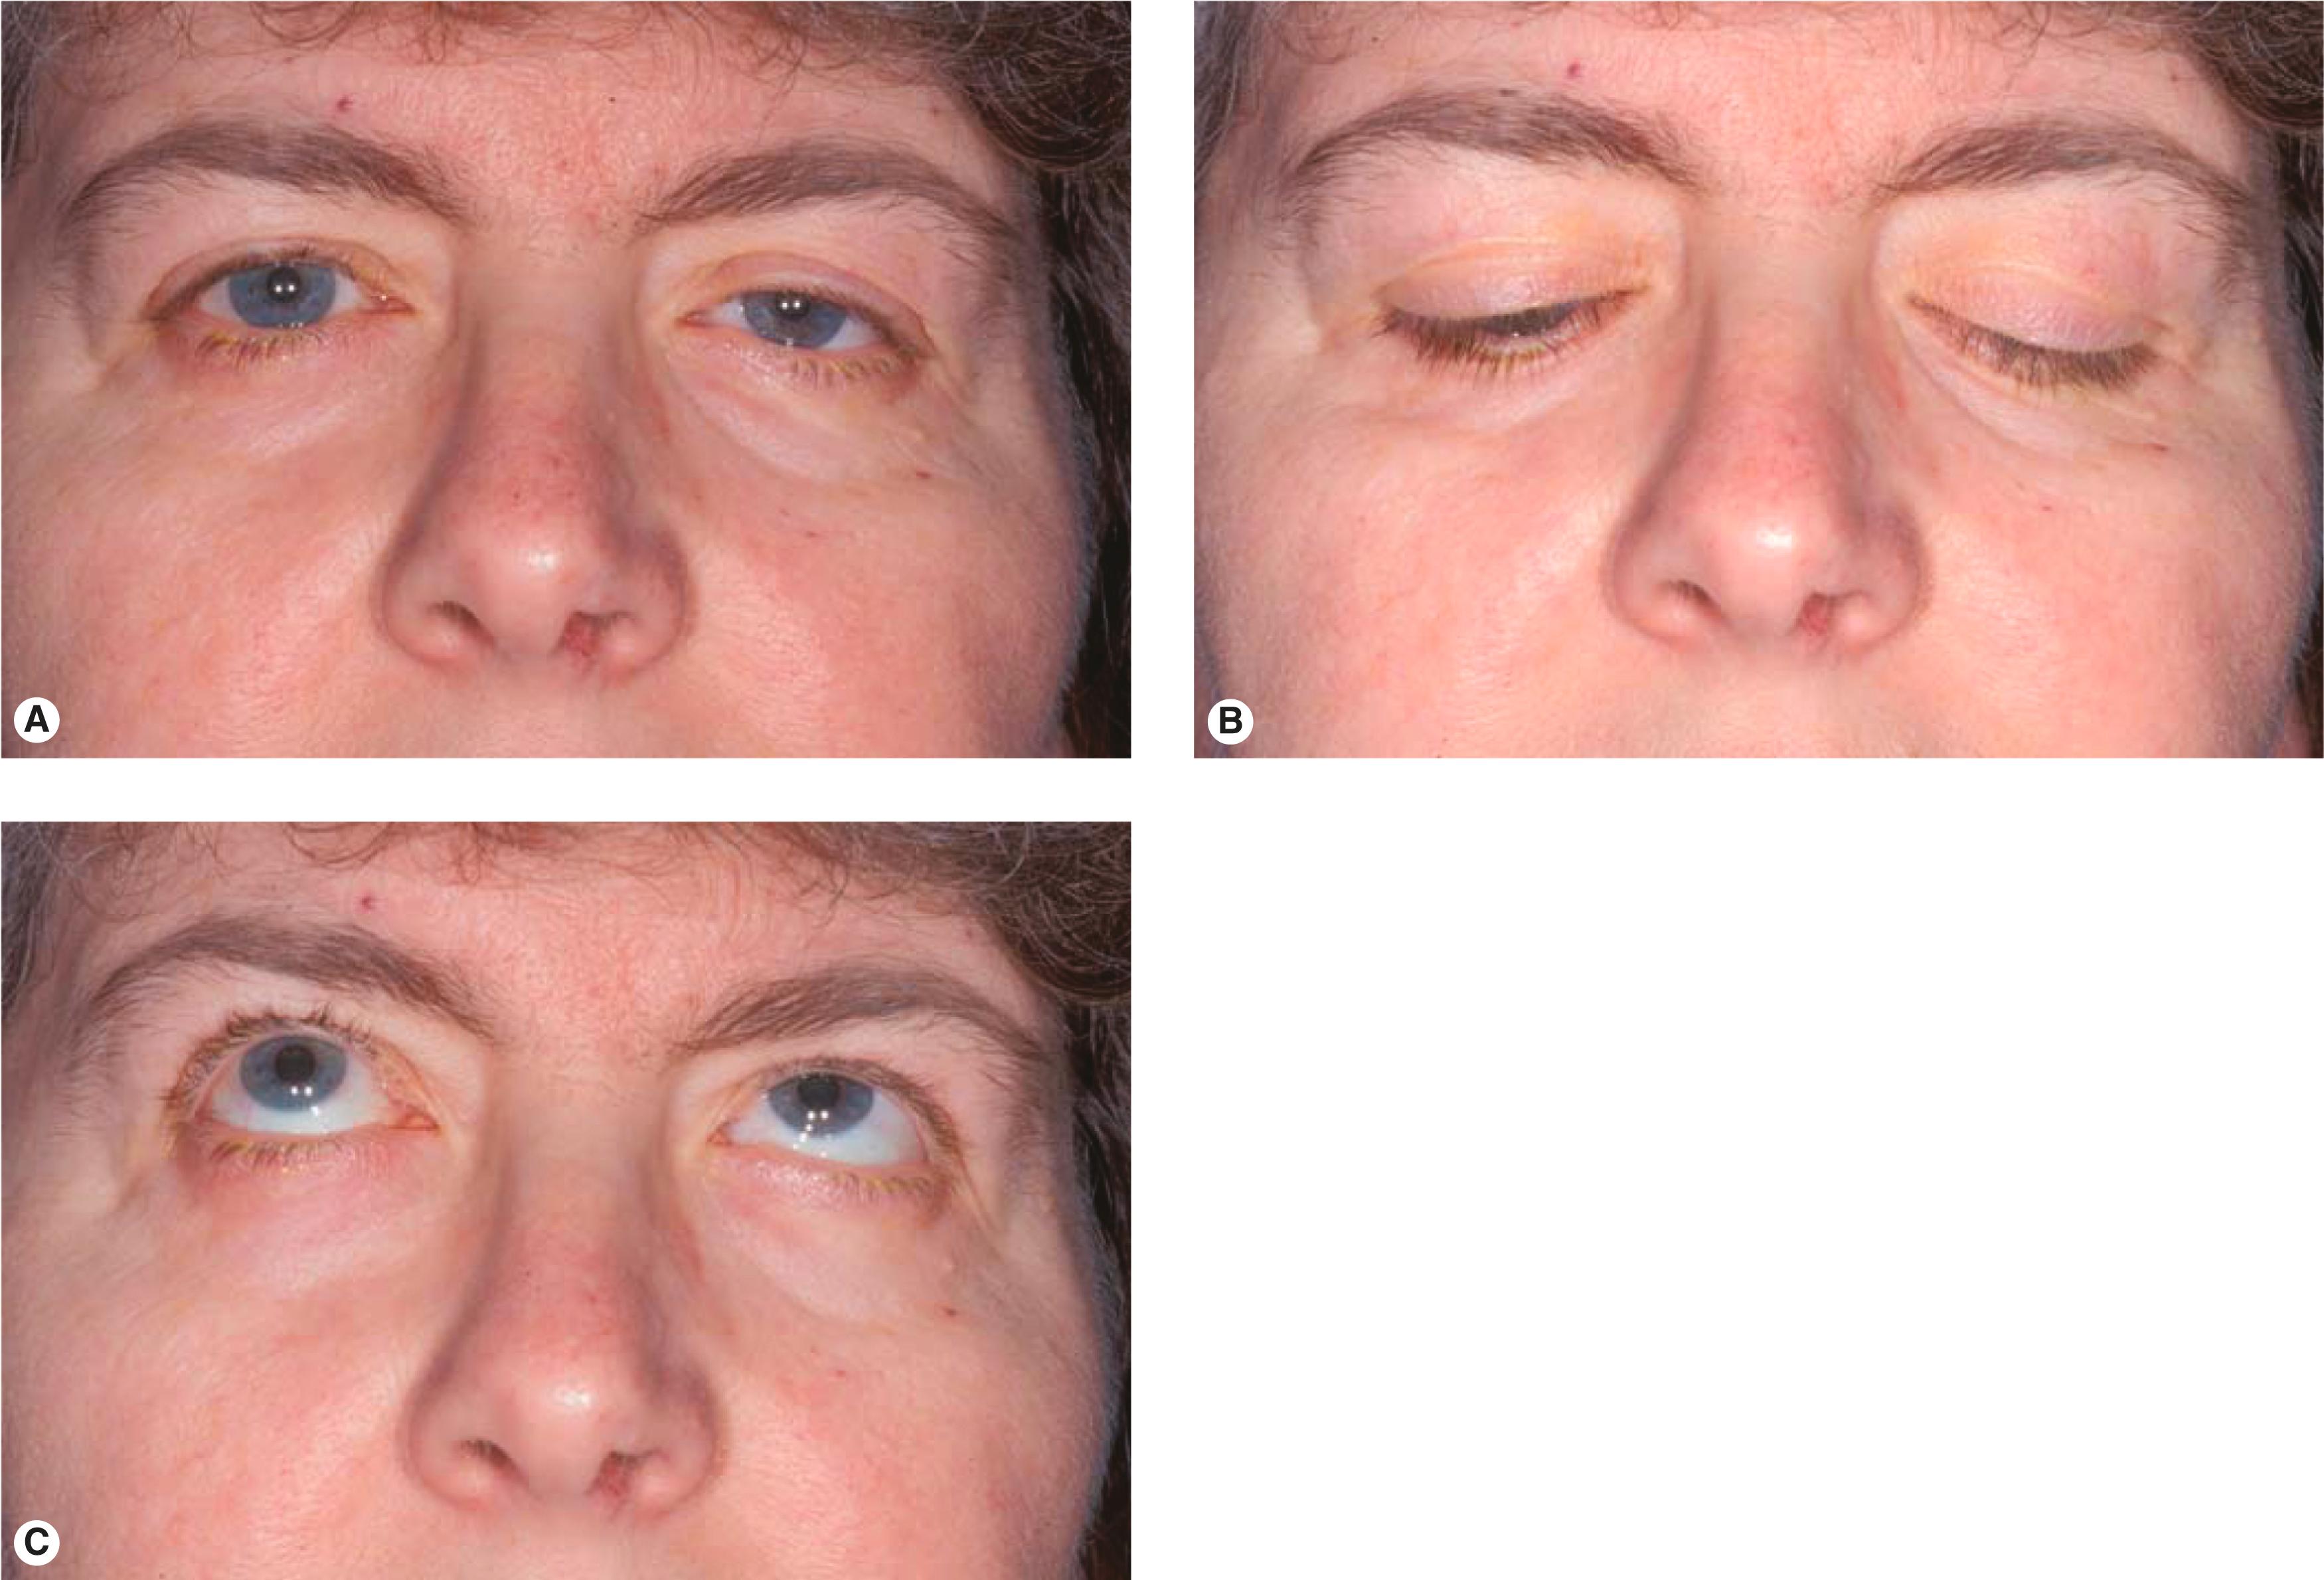 Figure 8.12, Characteristics of involutional ptosis. ( A ) Ptotic left upper eyelid with a high skin crease. ( B ) The upper eyelid shows lid drop on downgaze. ( C ) The levator function is normal.